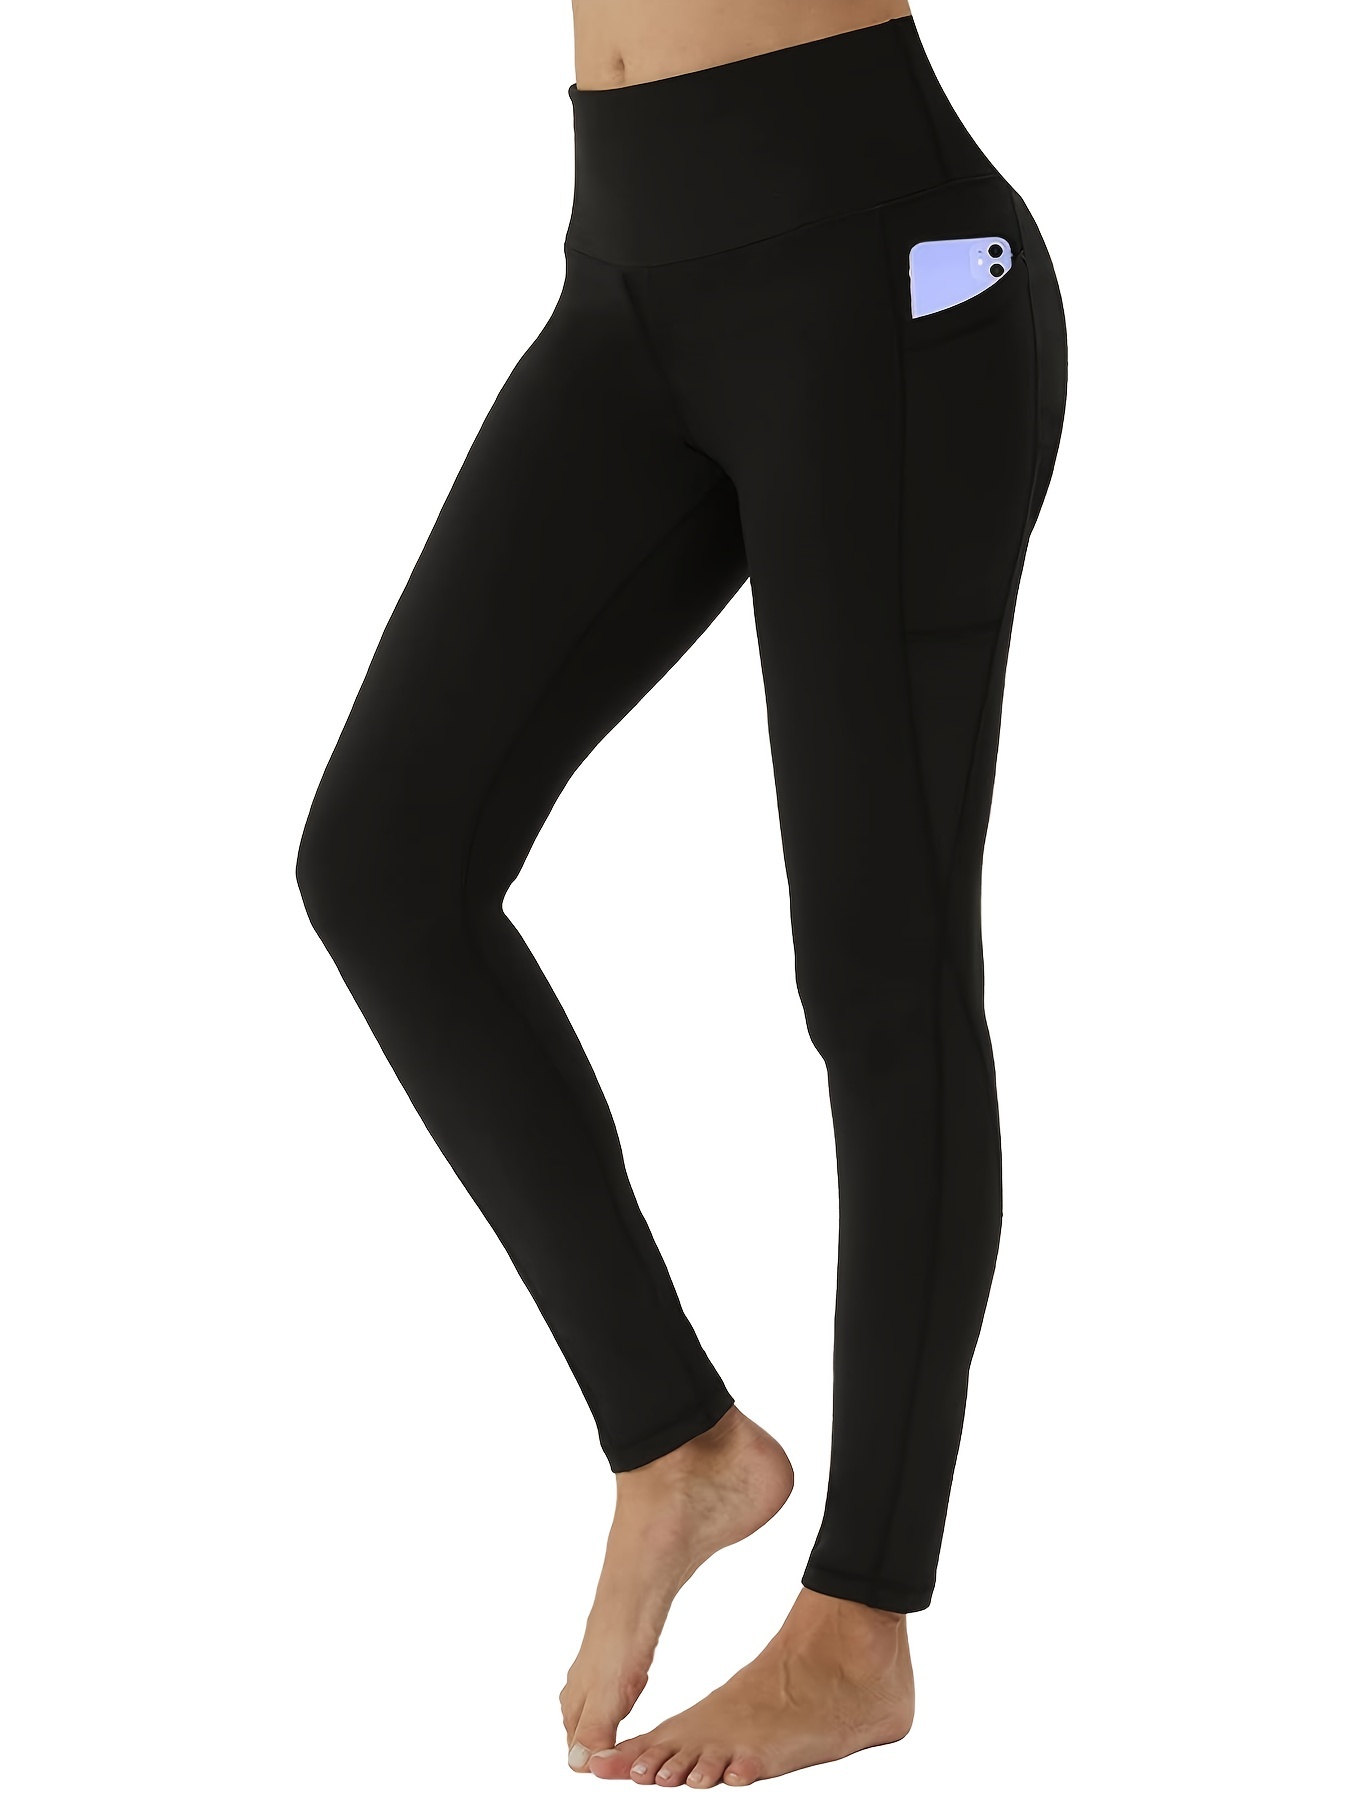 Women's High Waist Tummy Control Yoga Leggings - Look & Feel Your Best in  These Sports Pants!